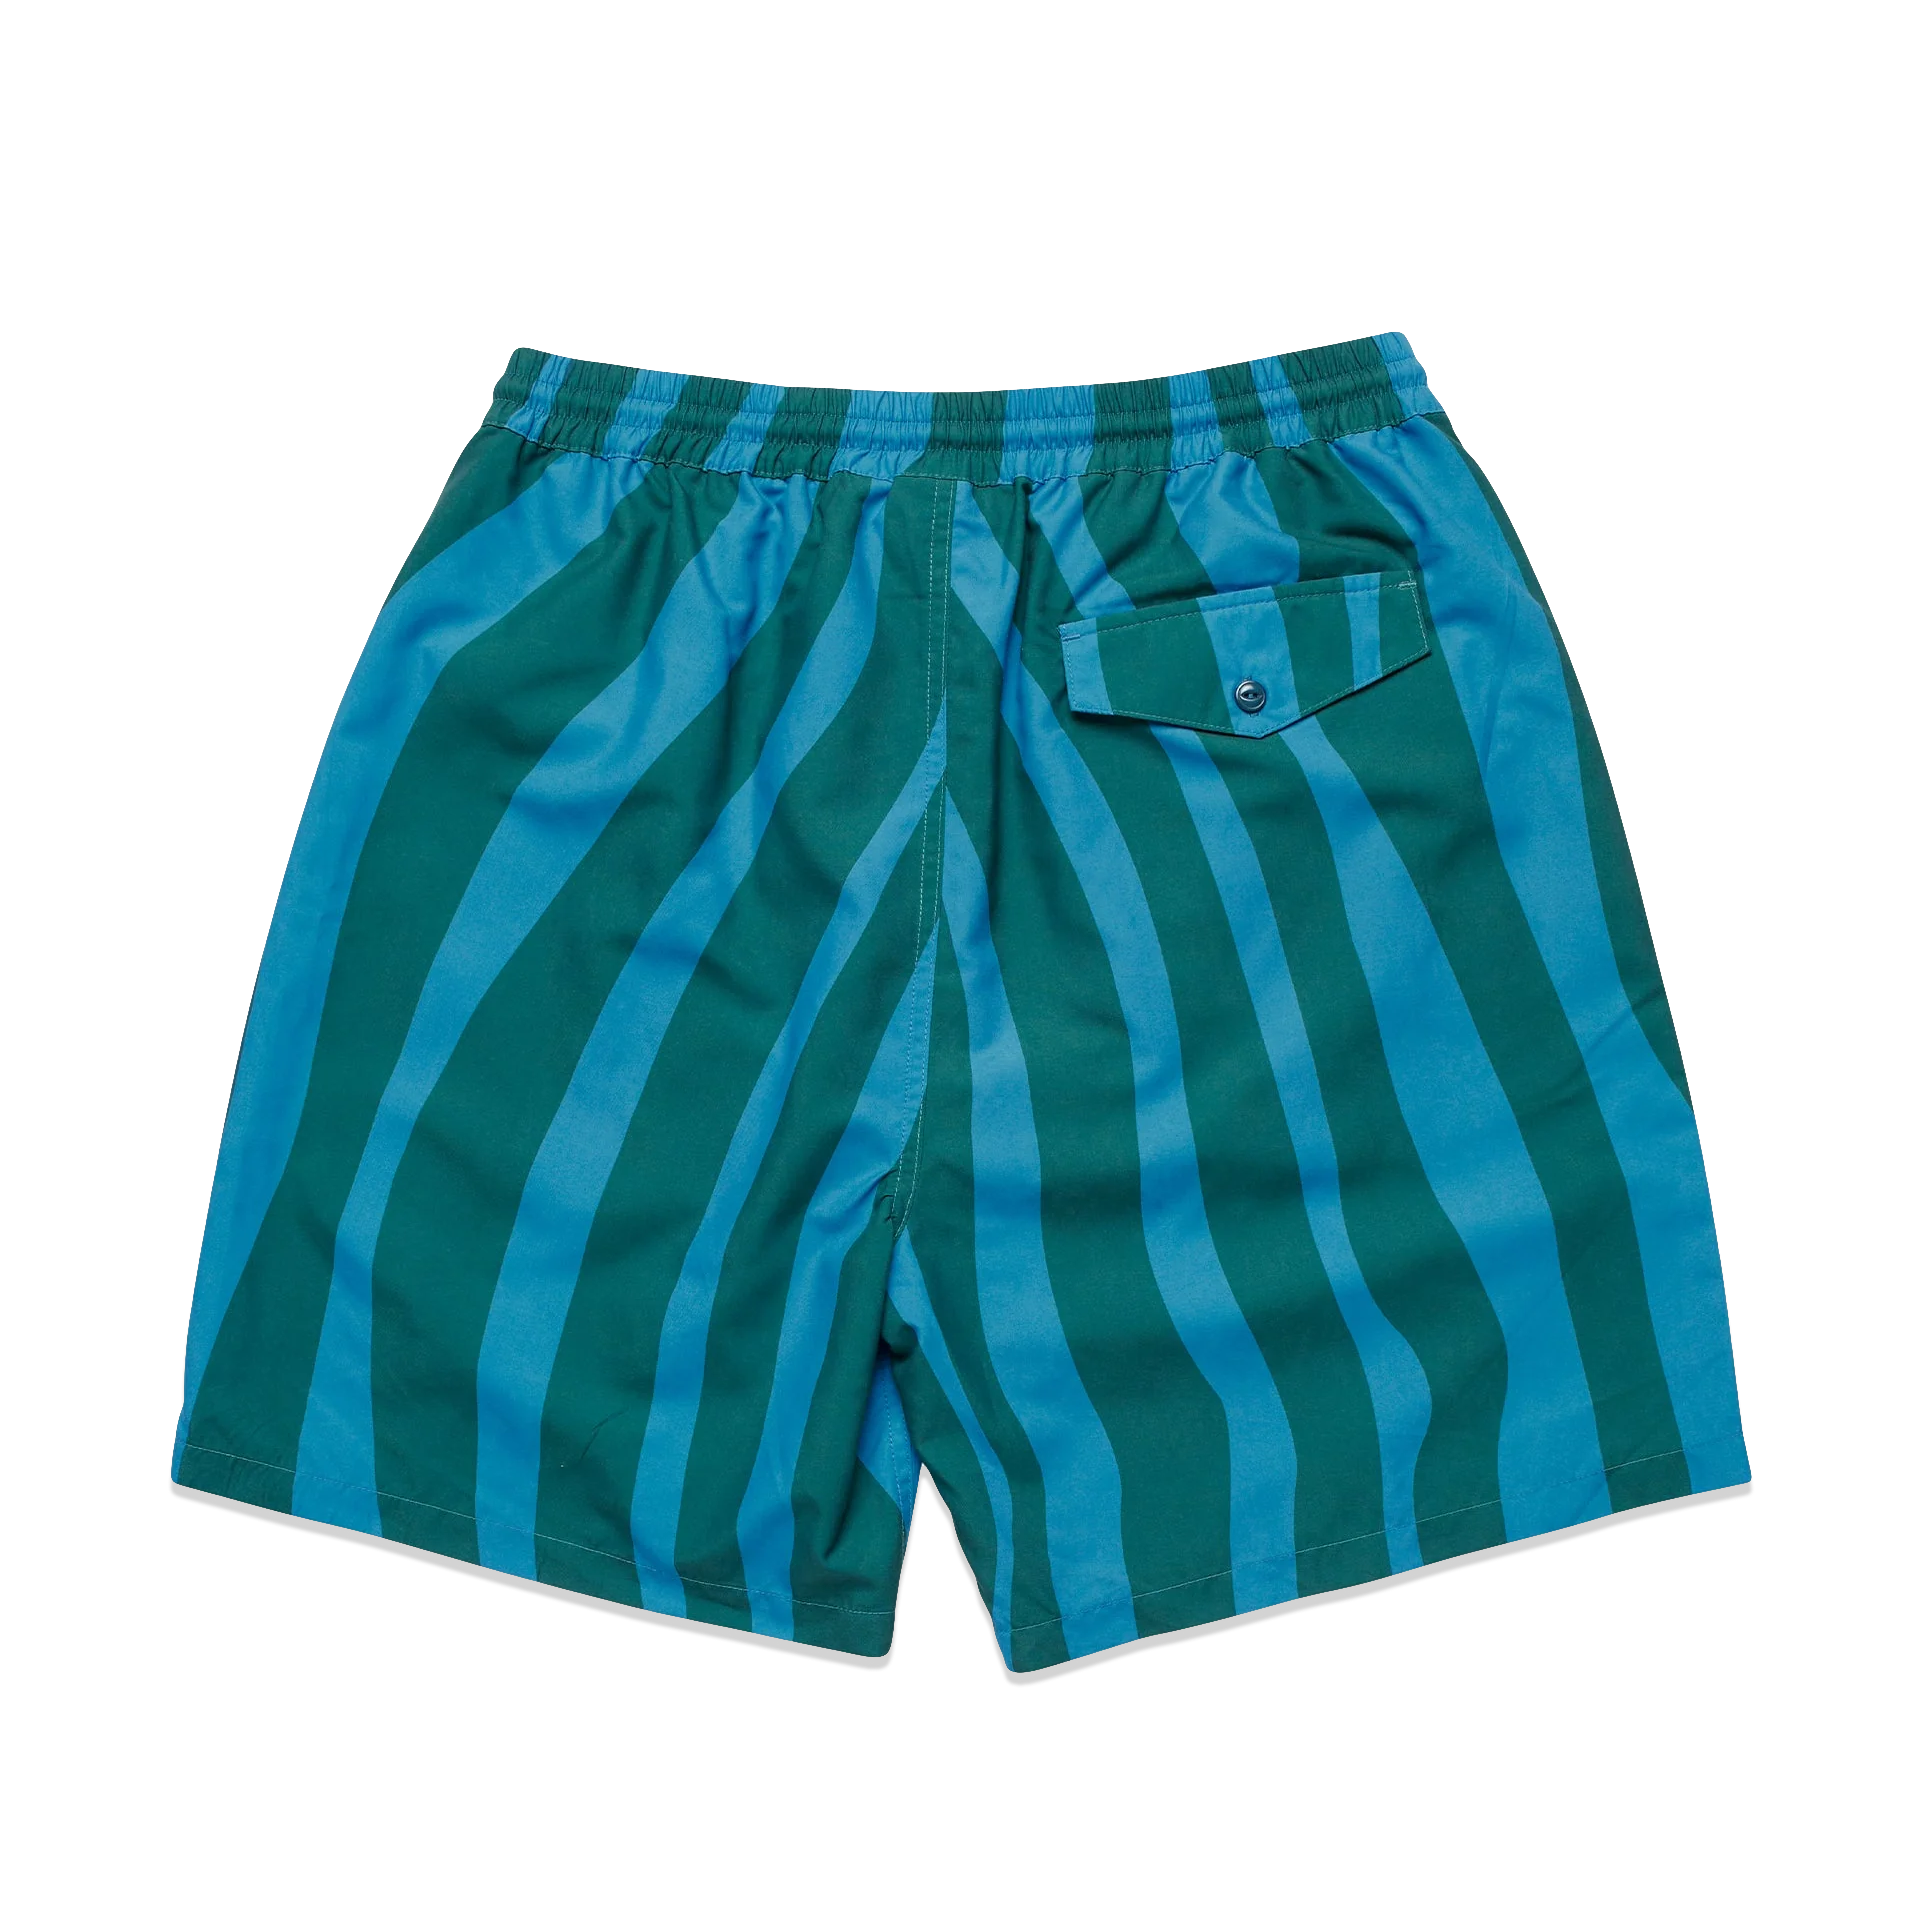 by Parra Aqua Weed Waves Shorts 'Blue/Teal'